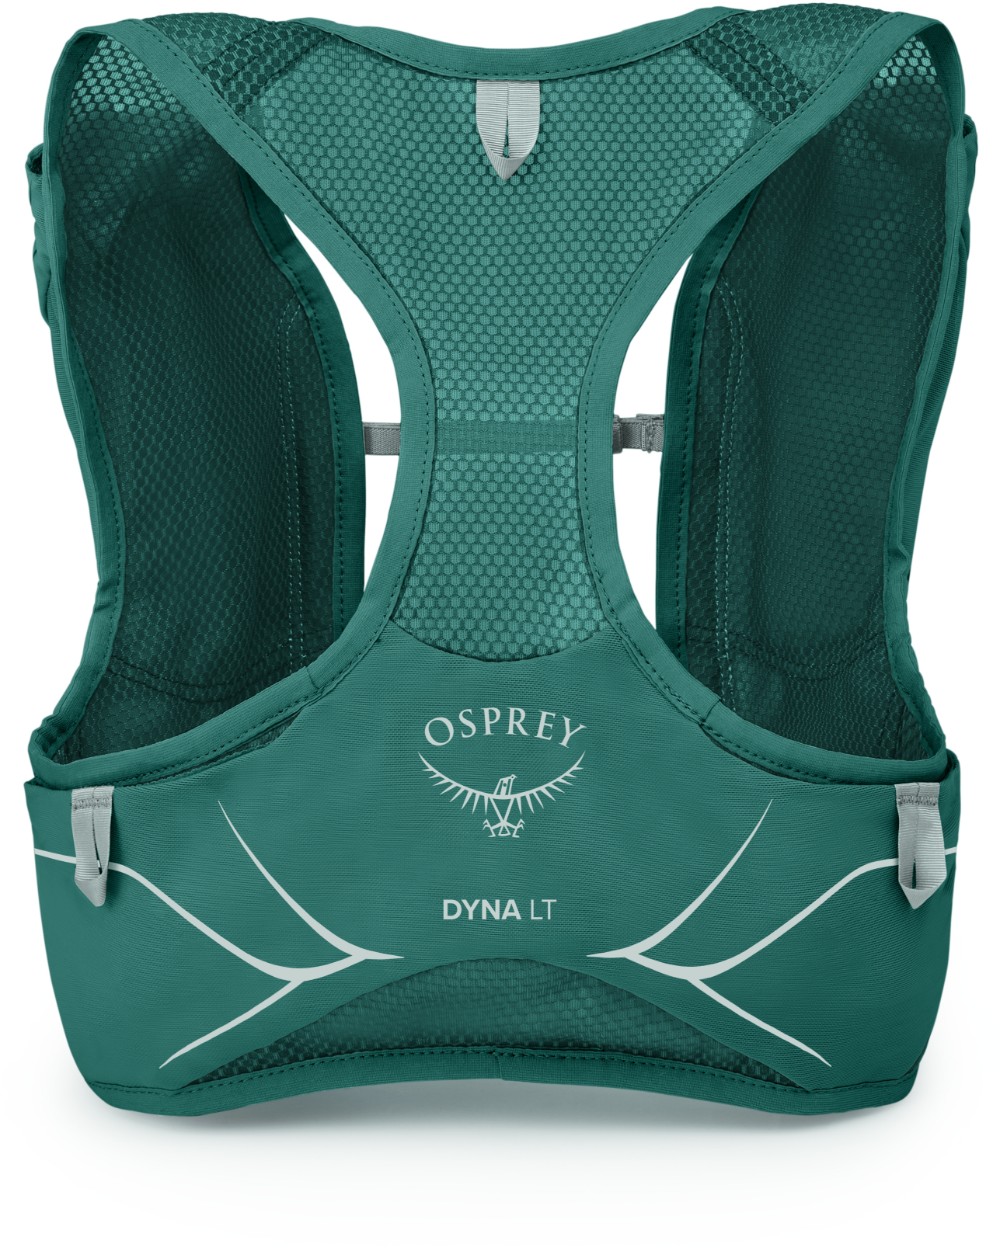 Dyna LT Womens Hydration Pack image 2